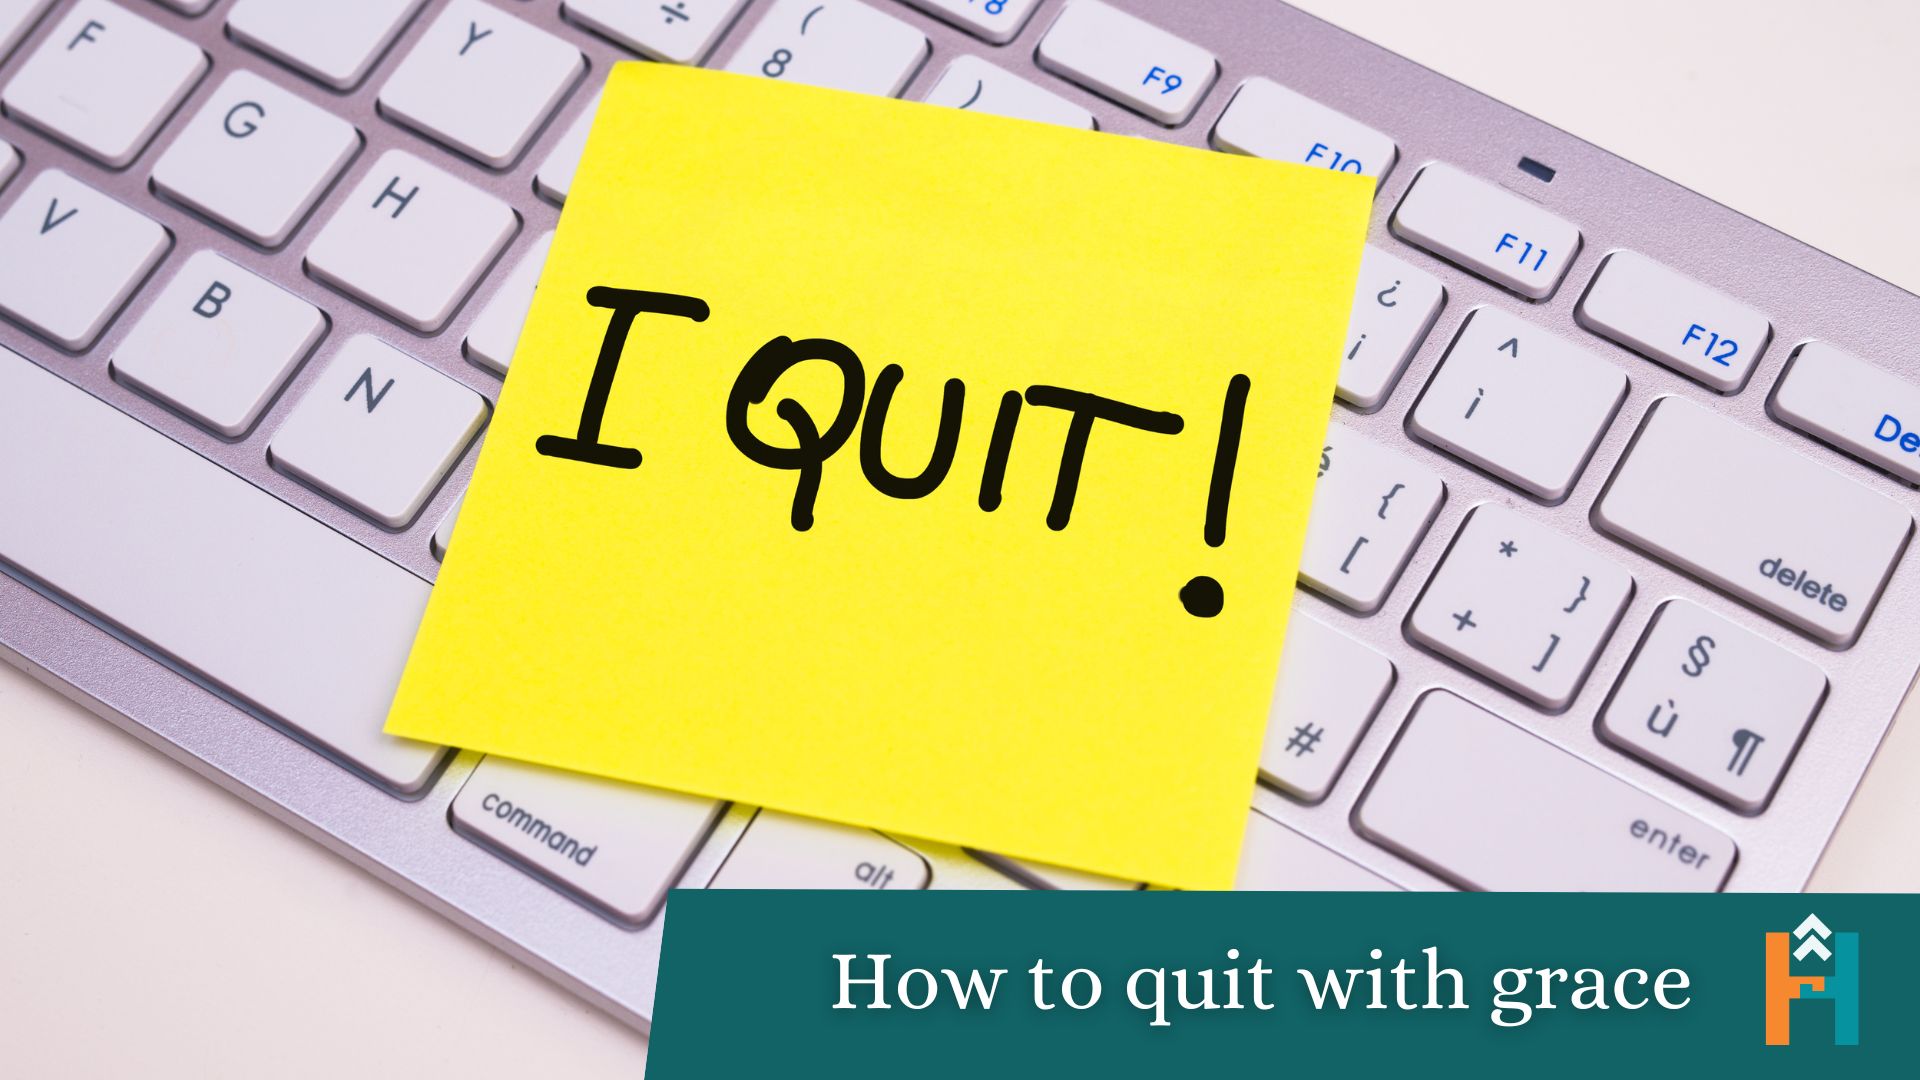 How to quit with grace